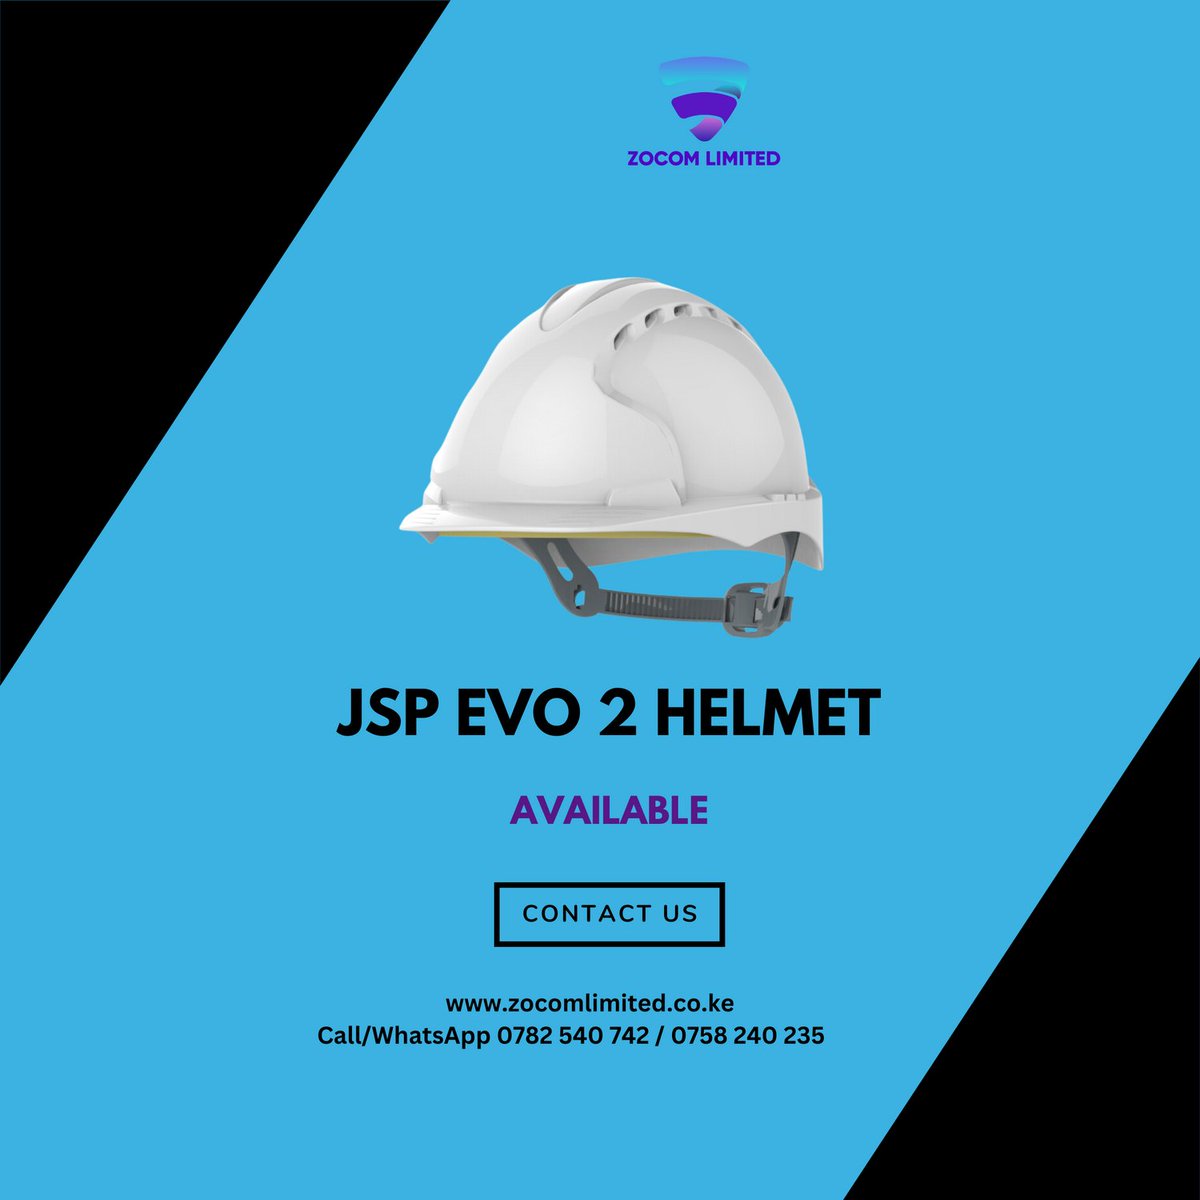 Don't settle for just any hard hat.  Choose the JSP Evo 2 and take your safety to the next level!

#InvestInSafety #JSPEvo2 #SafetyGearUpgrade #HardHatHero #safetyfirst #headprotection